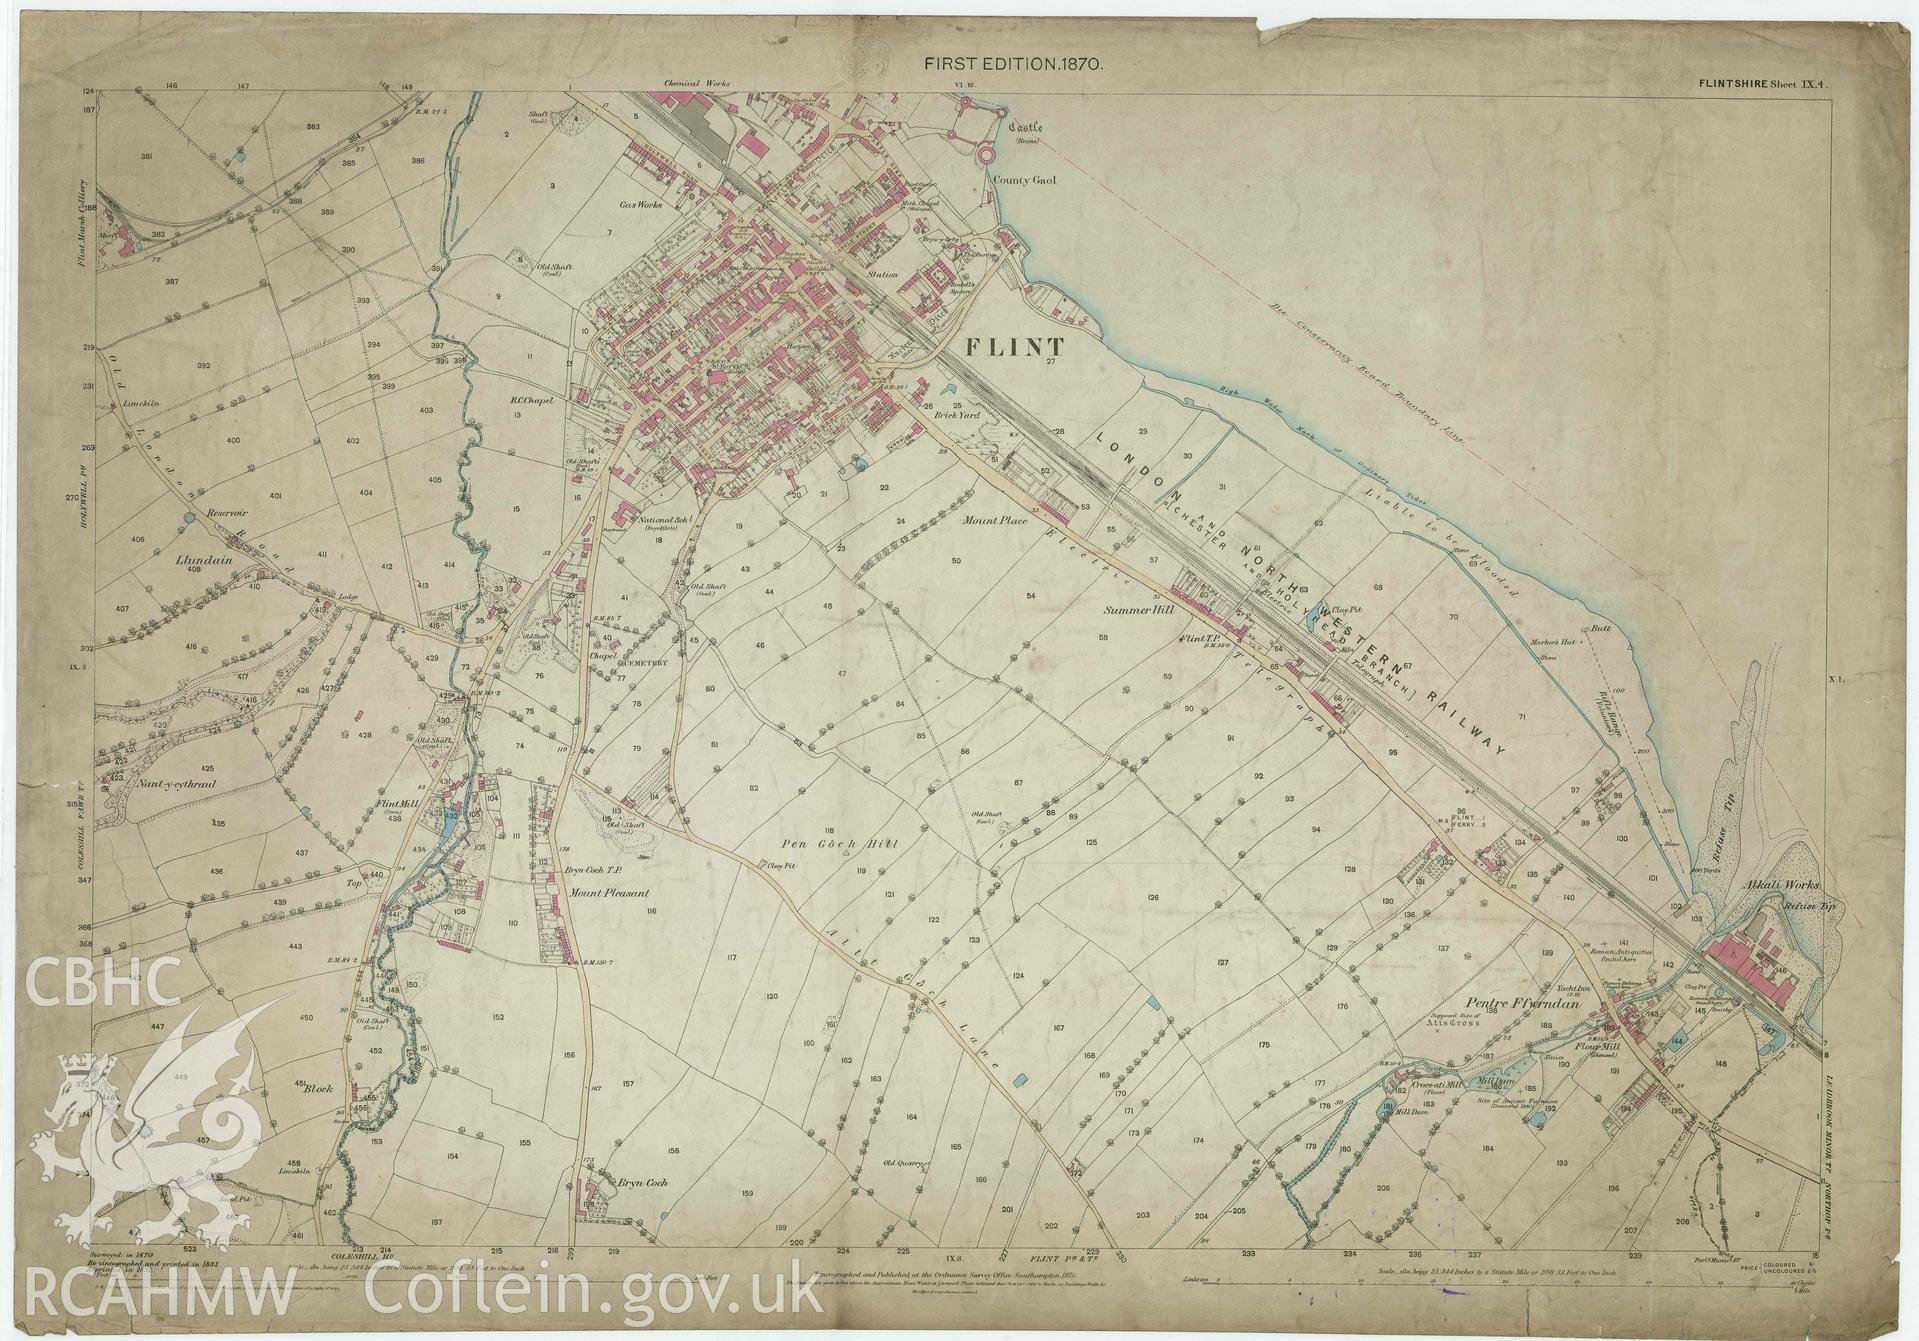 1st Edition Ordnance Survey Map (Colourised) showing Flint and surrounding area. Published in 1870. OS Sheet IX.4.